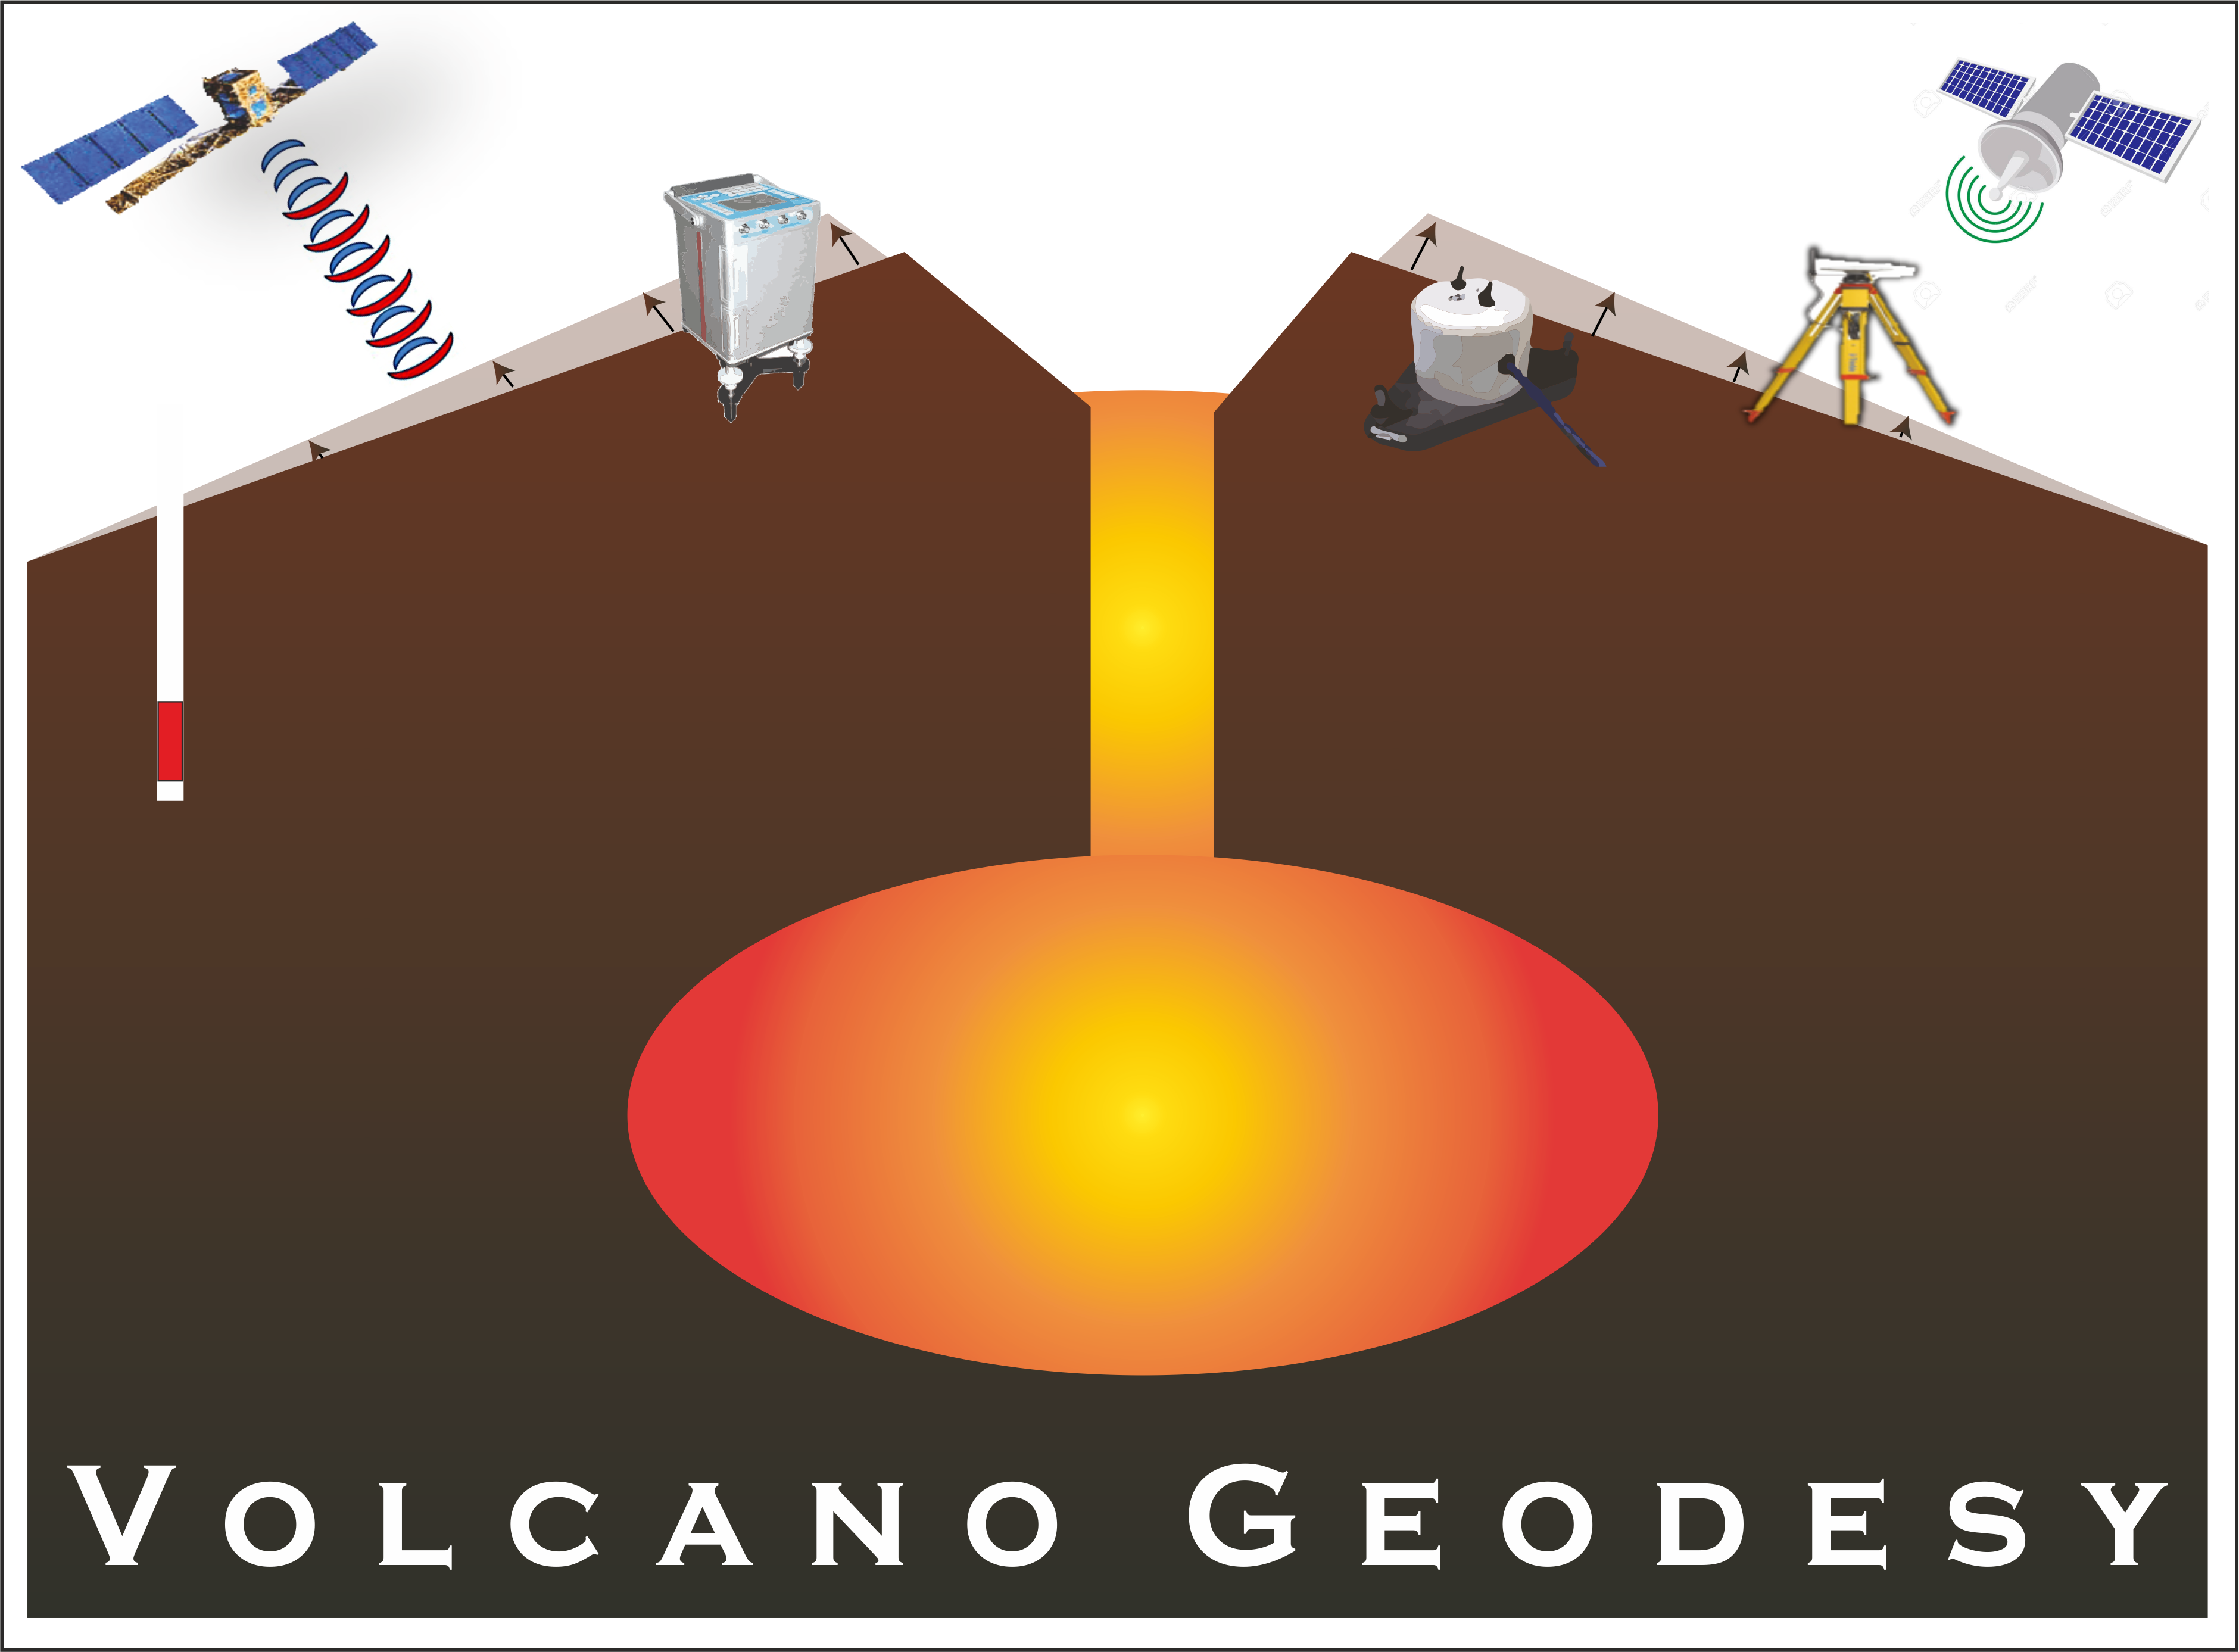 Commission on Volcano Geodesy